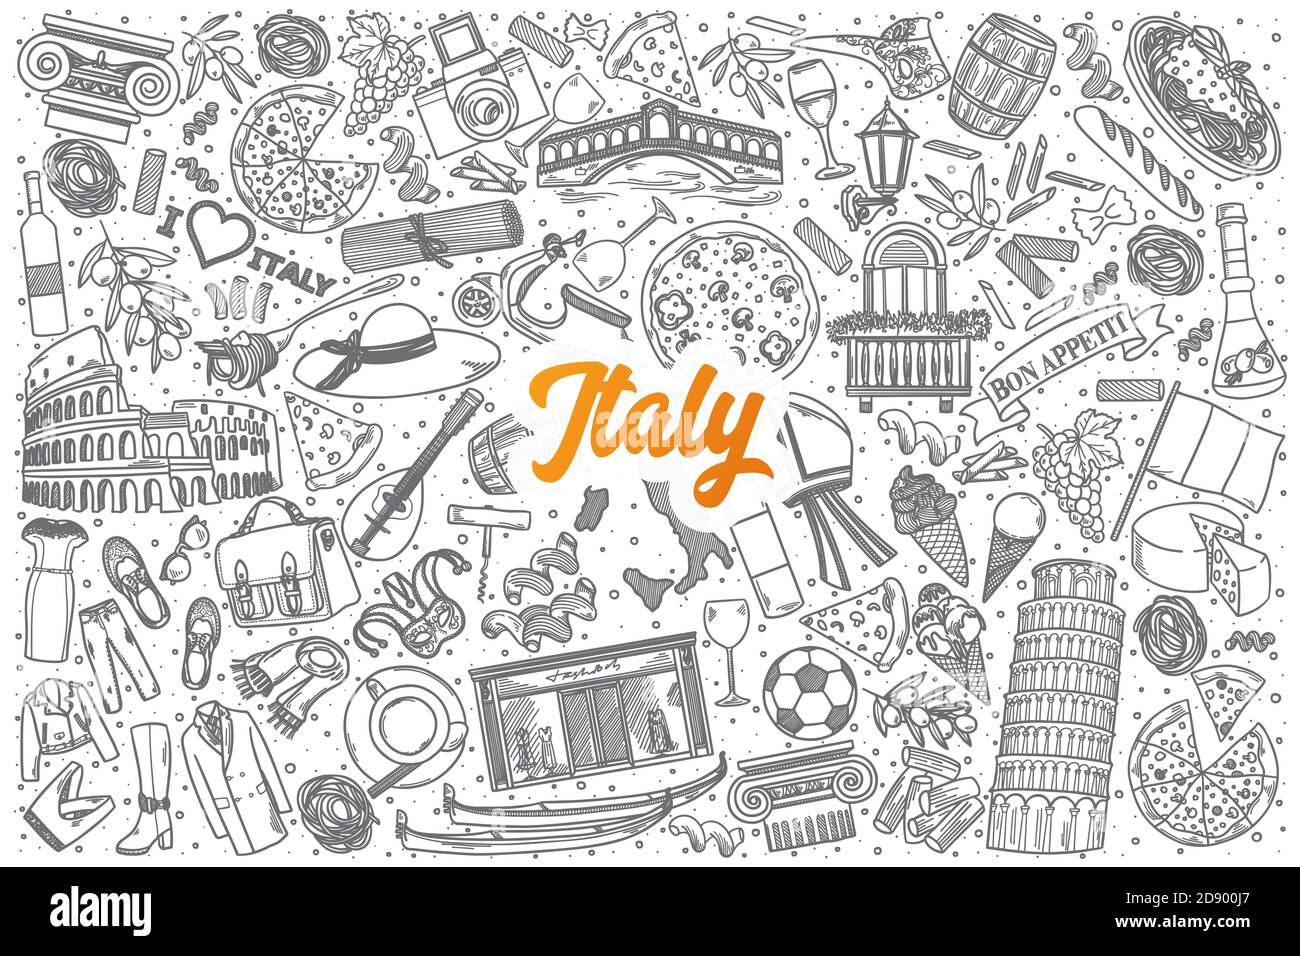 Hand drawn Italy doodle set background with orange lettering in vector Stock Photo